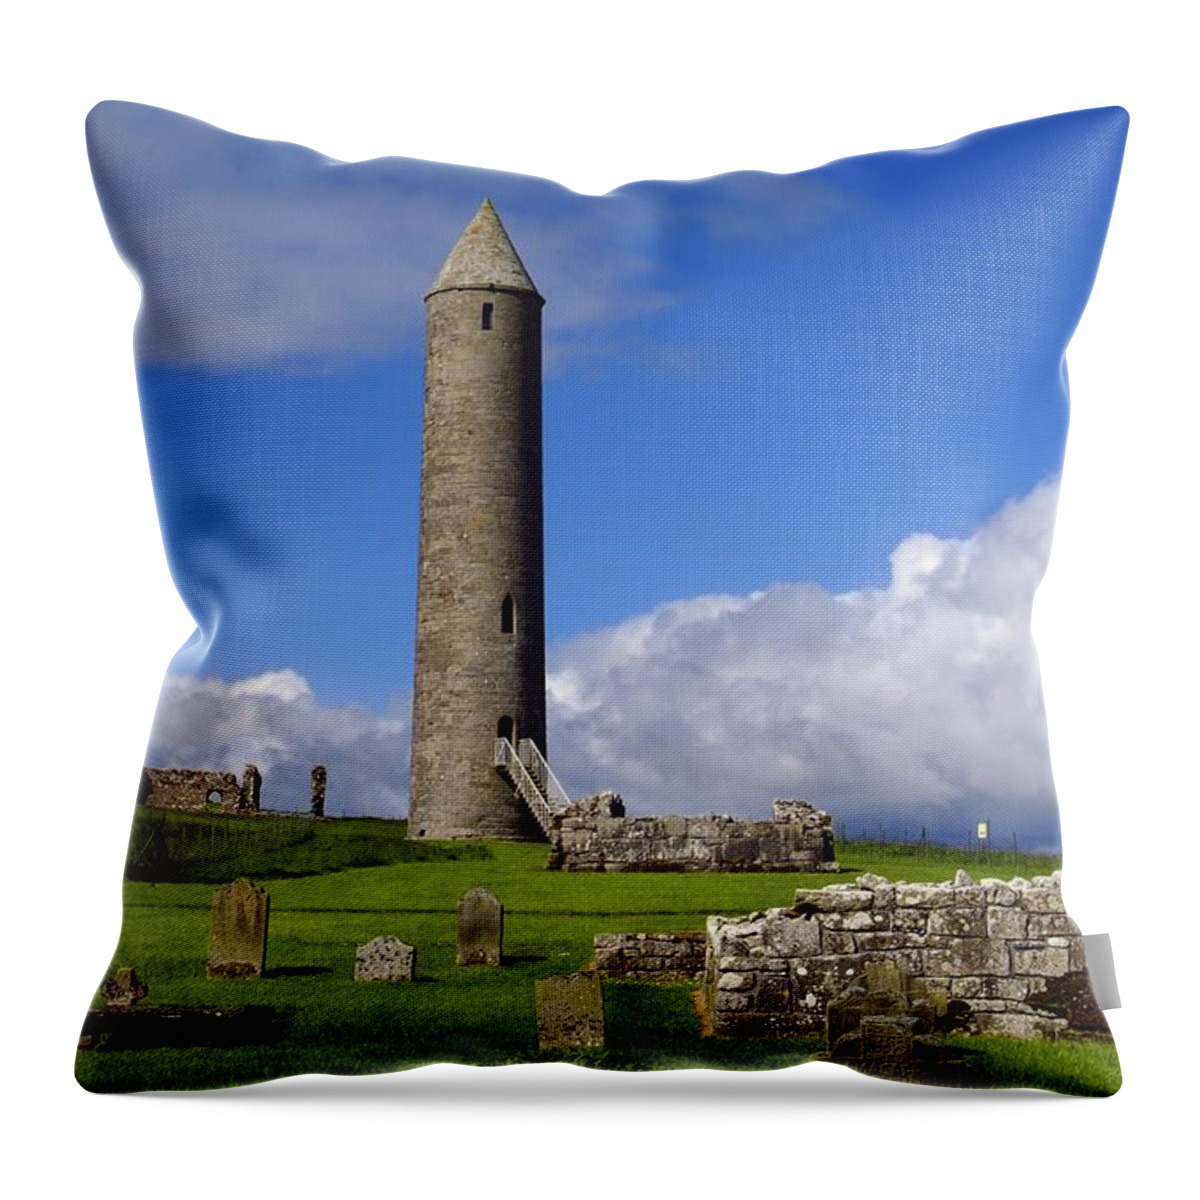 Architectural Exteriors Throw Pillow featuring the photograph Devenish Monastic Site, Co. Fermanagh #1 by The Irish Image Collection 